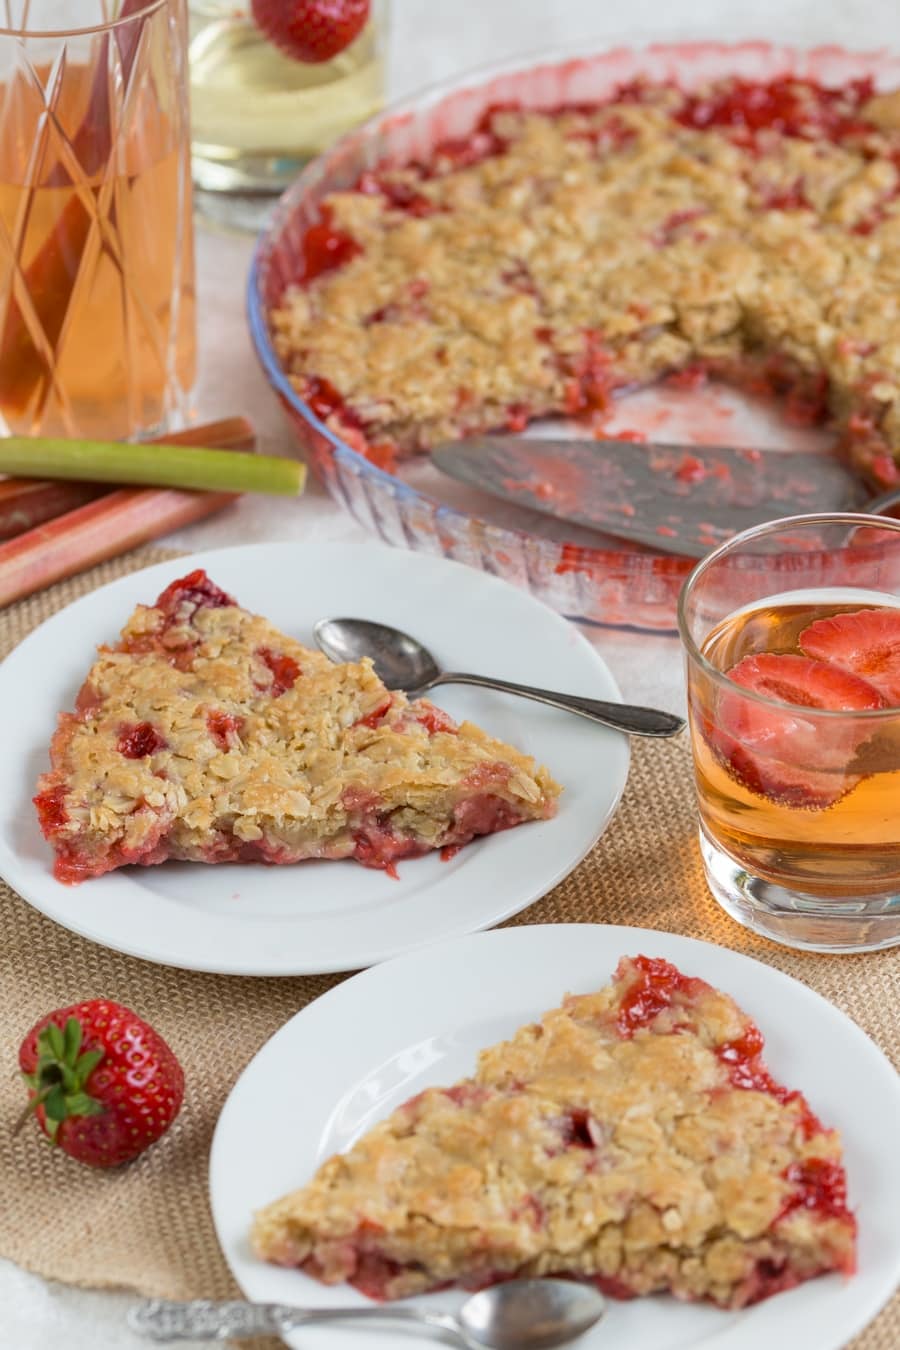 Two slices of strawberry rhubarb crisp.